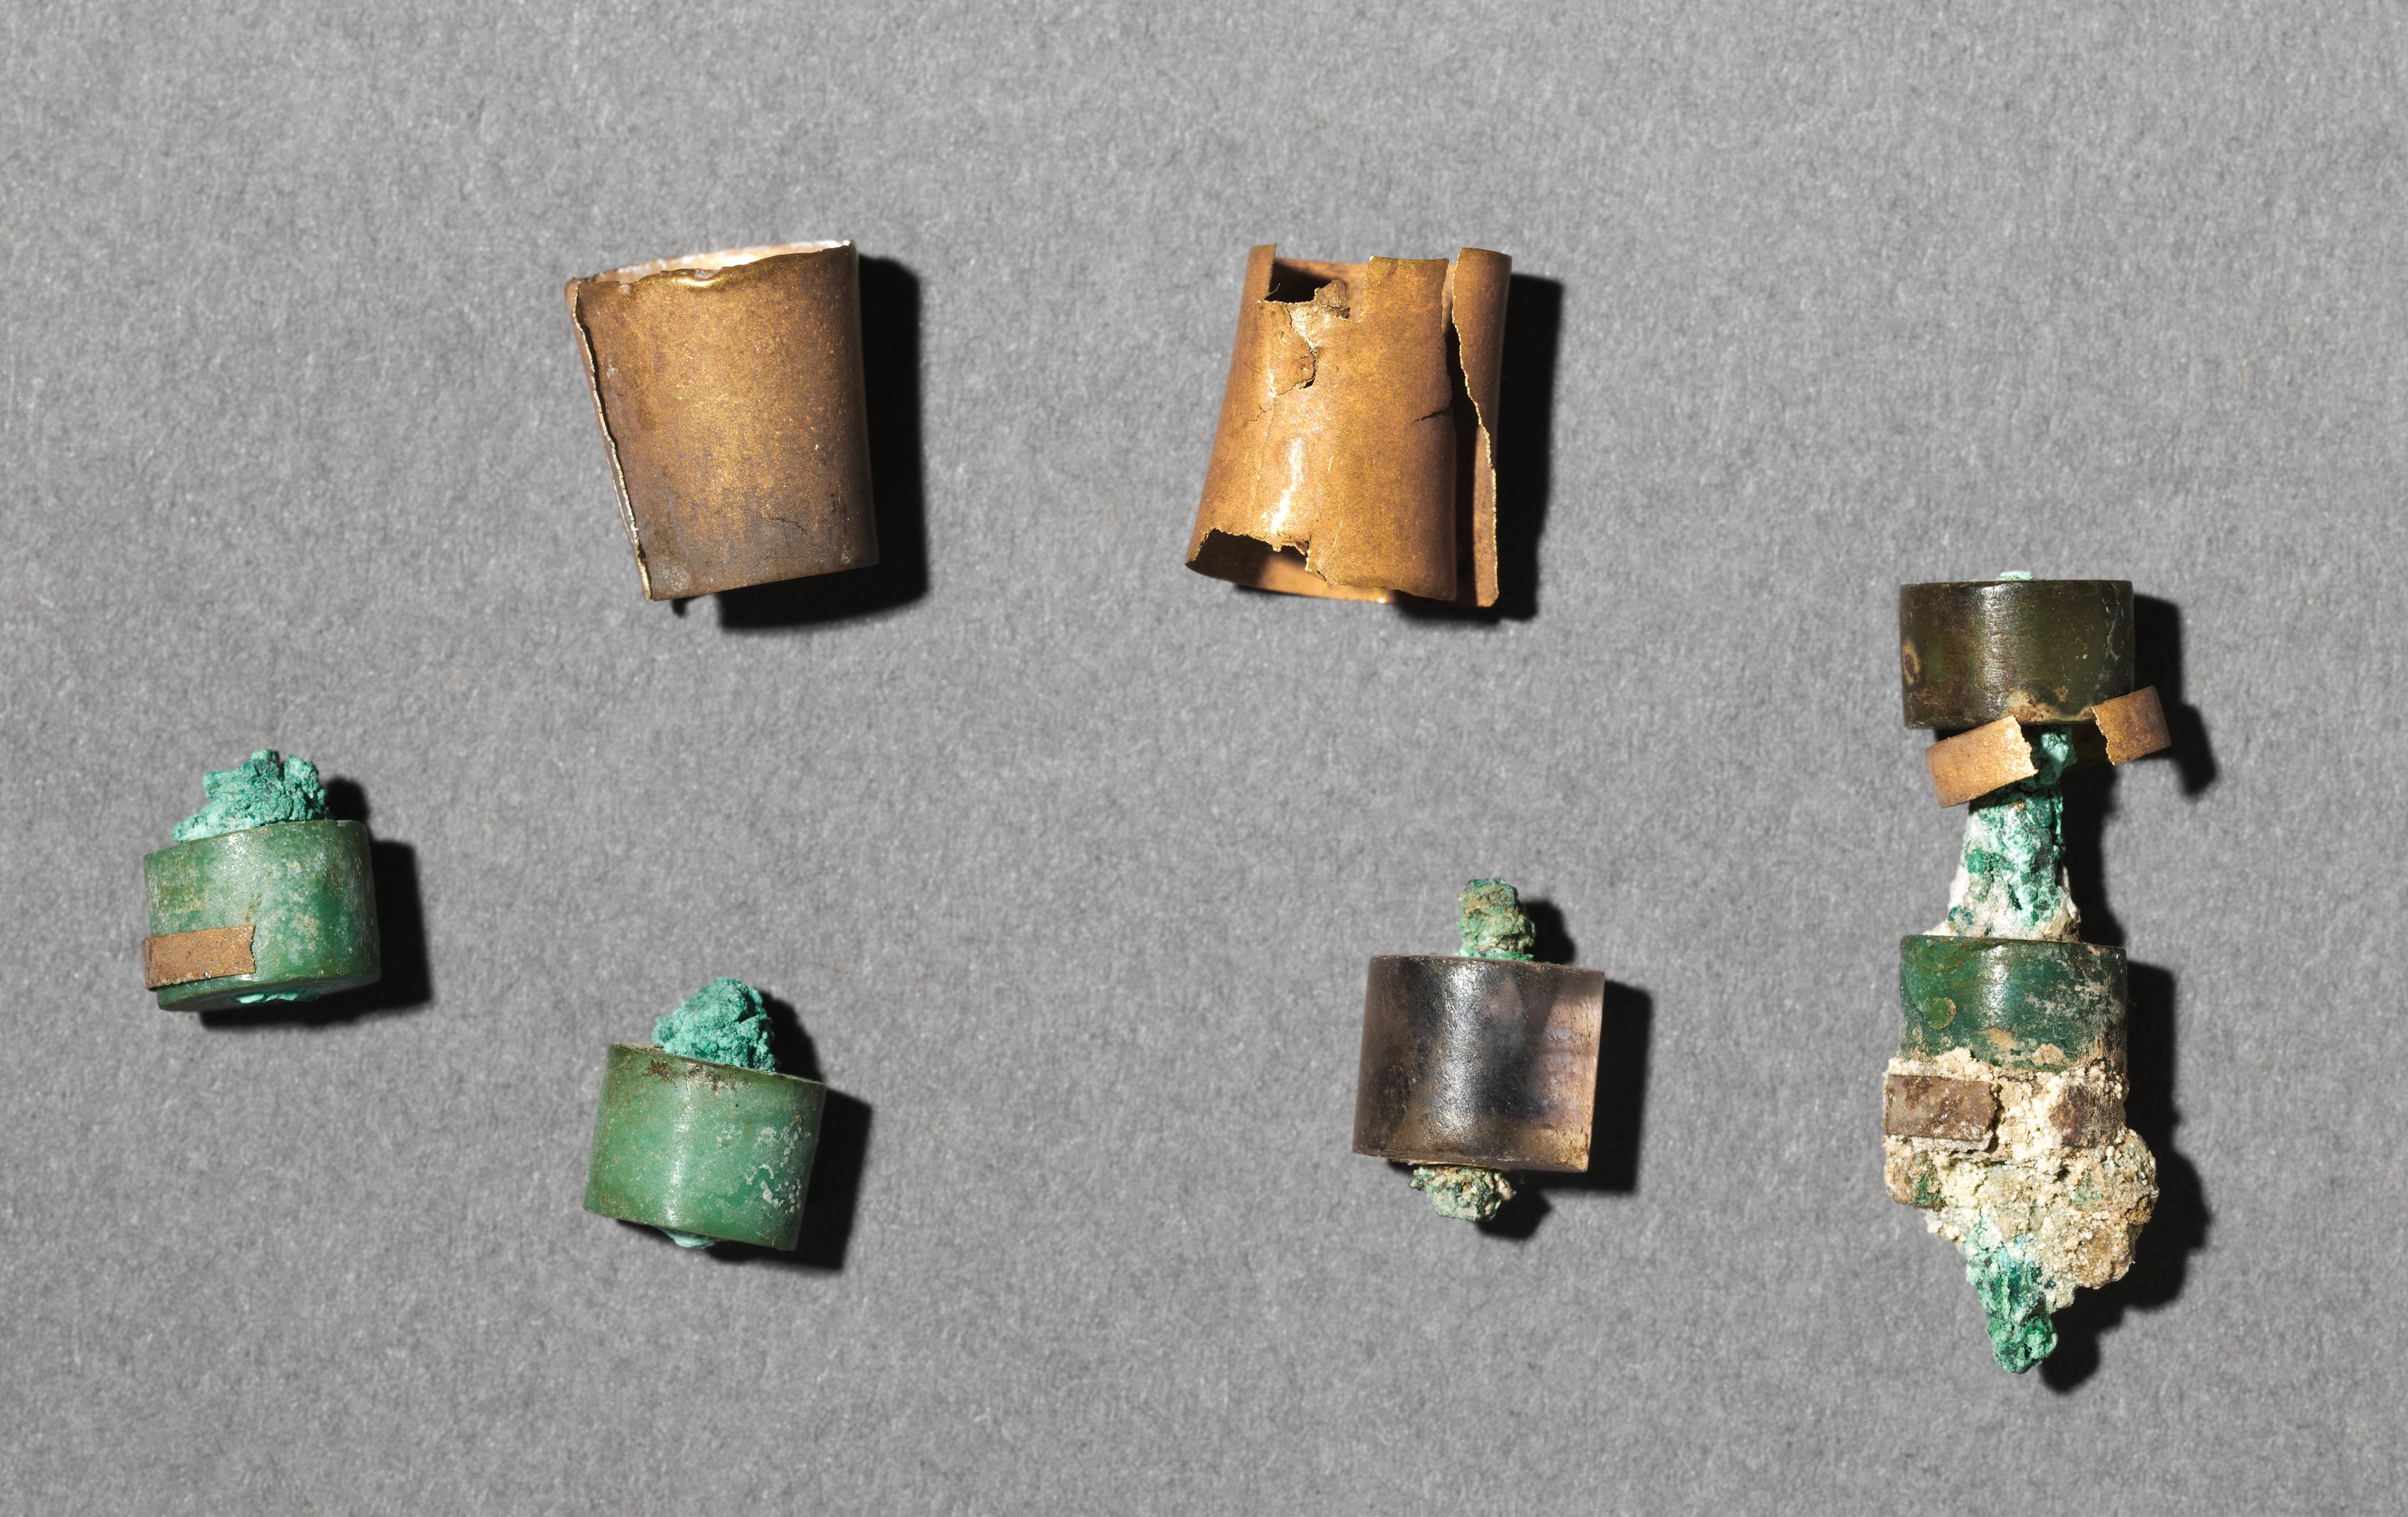 Fragments of an Amuletic Cylinder